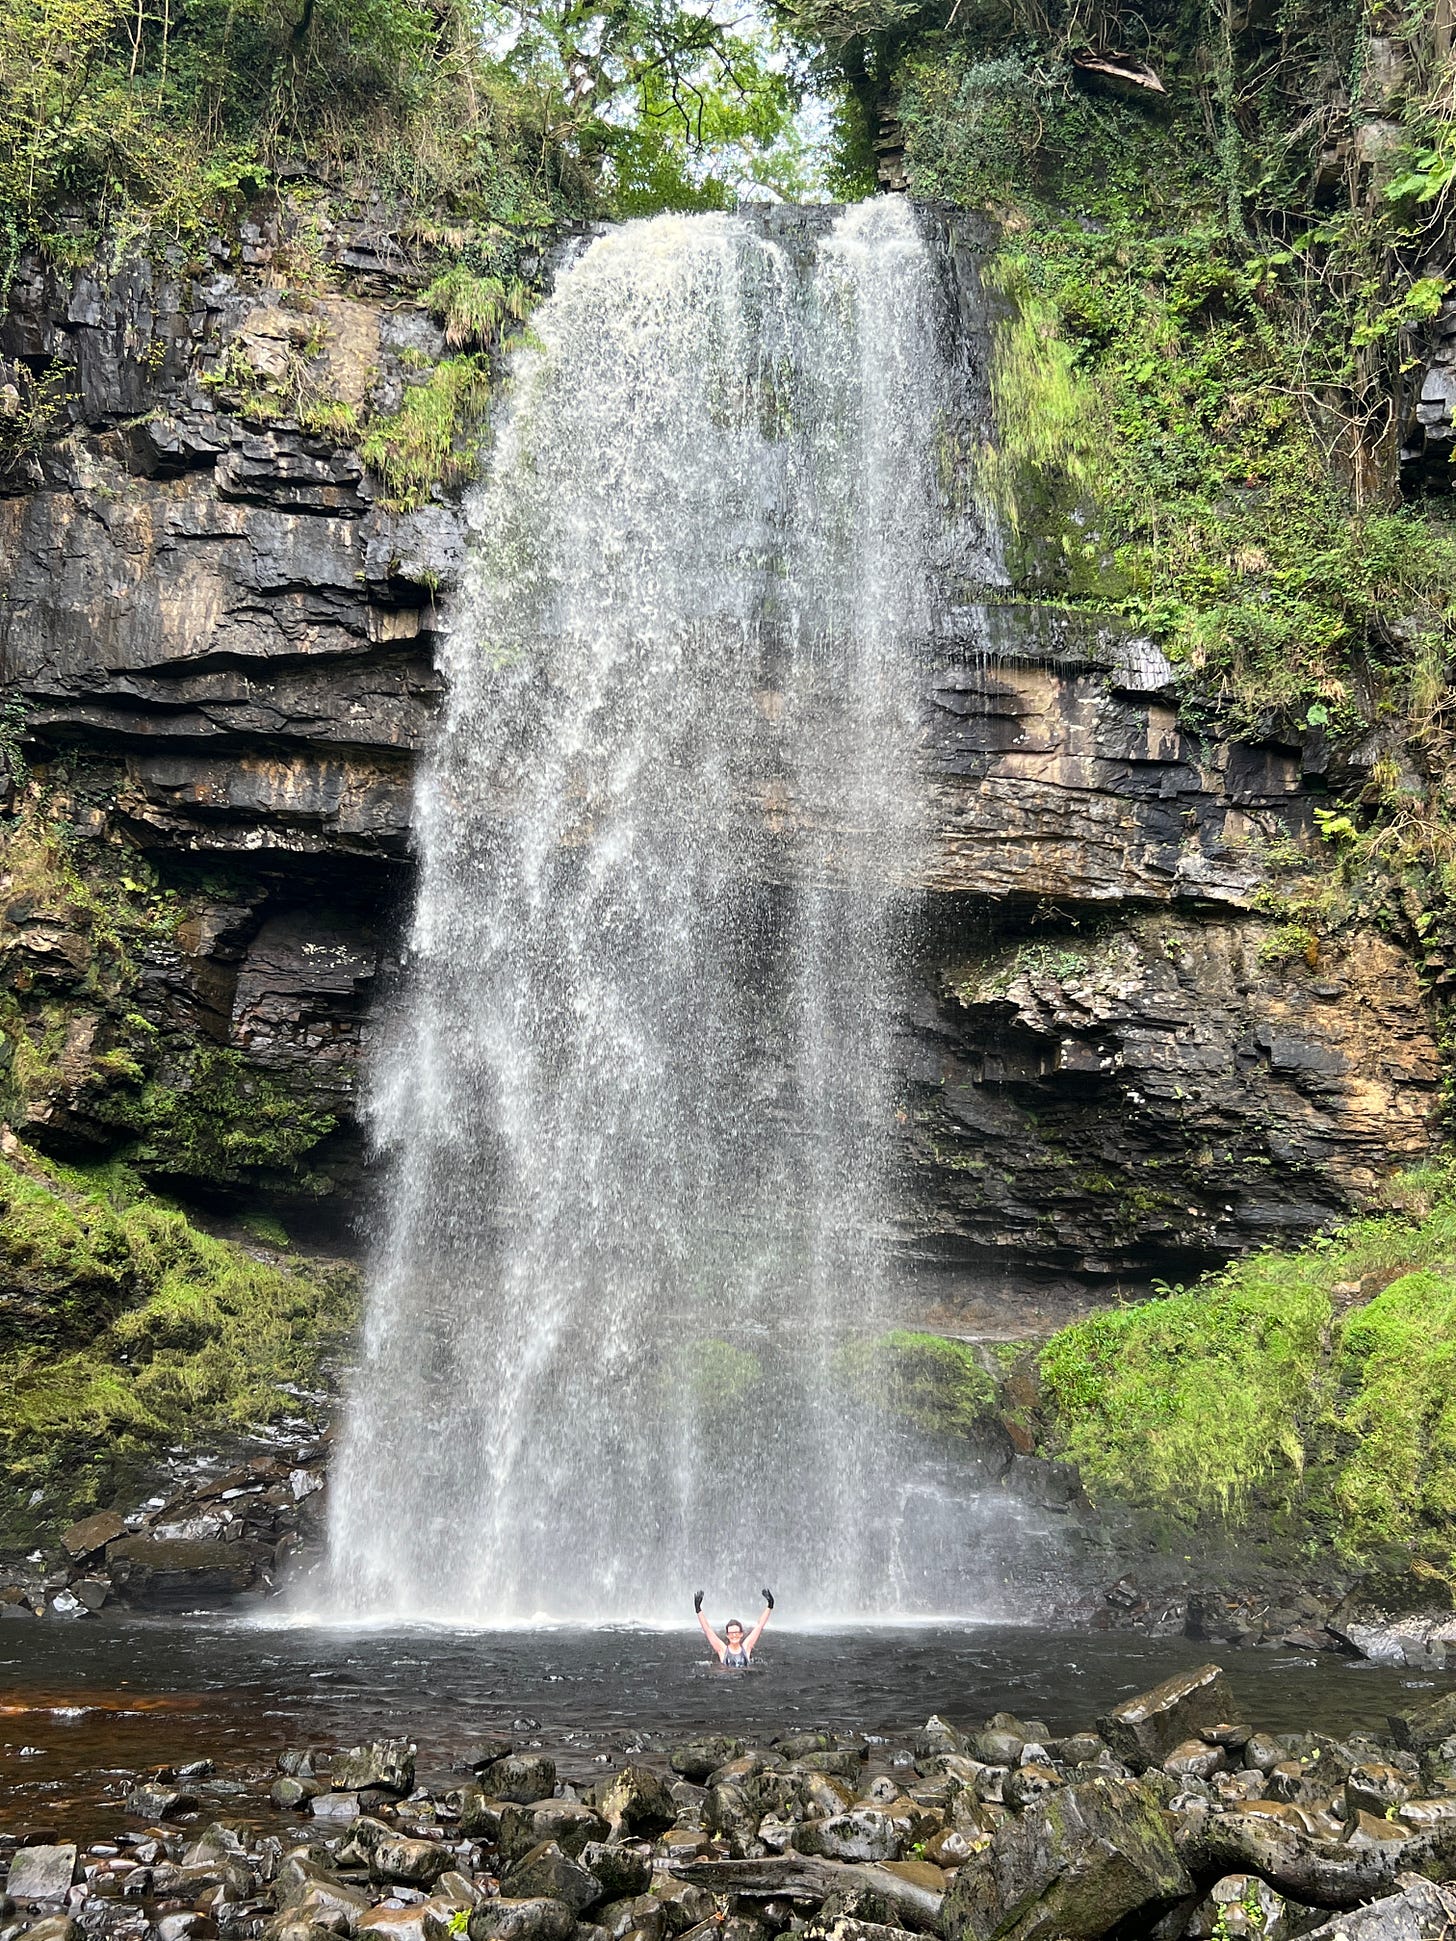 A very very tall waterfall cascades down into a pool where a very small but very happy swimmer waves at the camera.